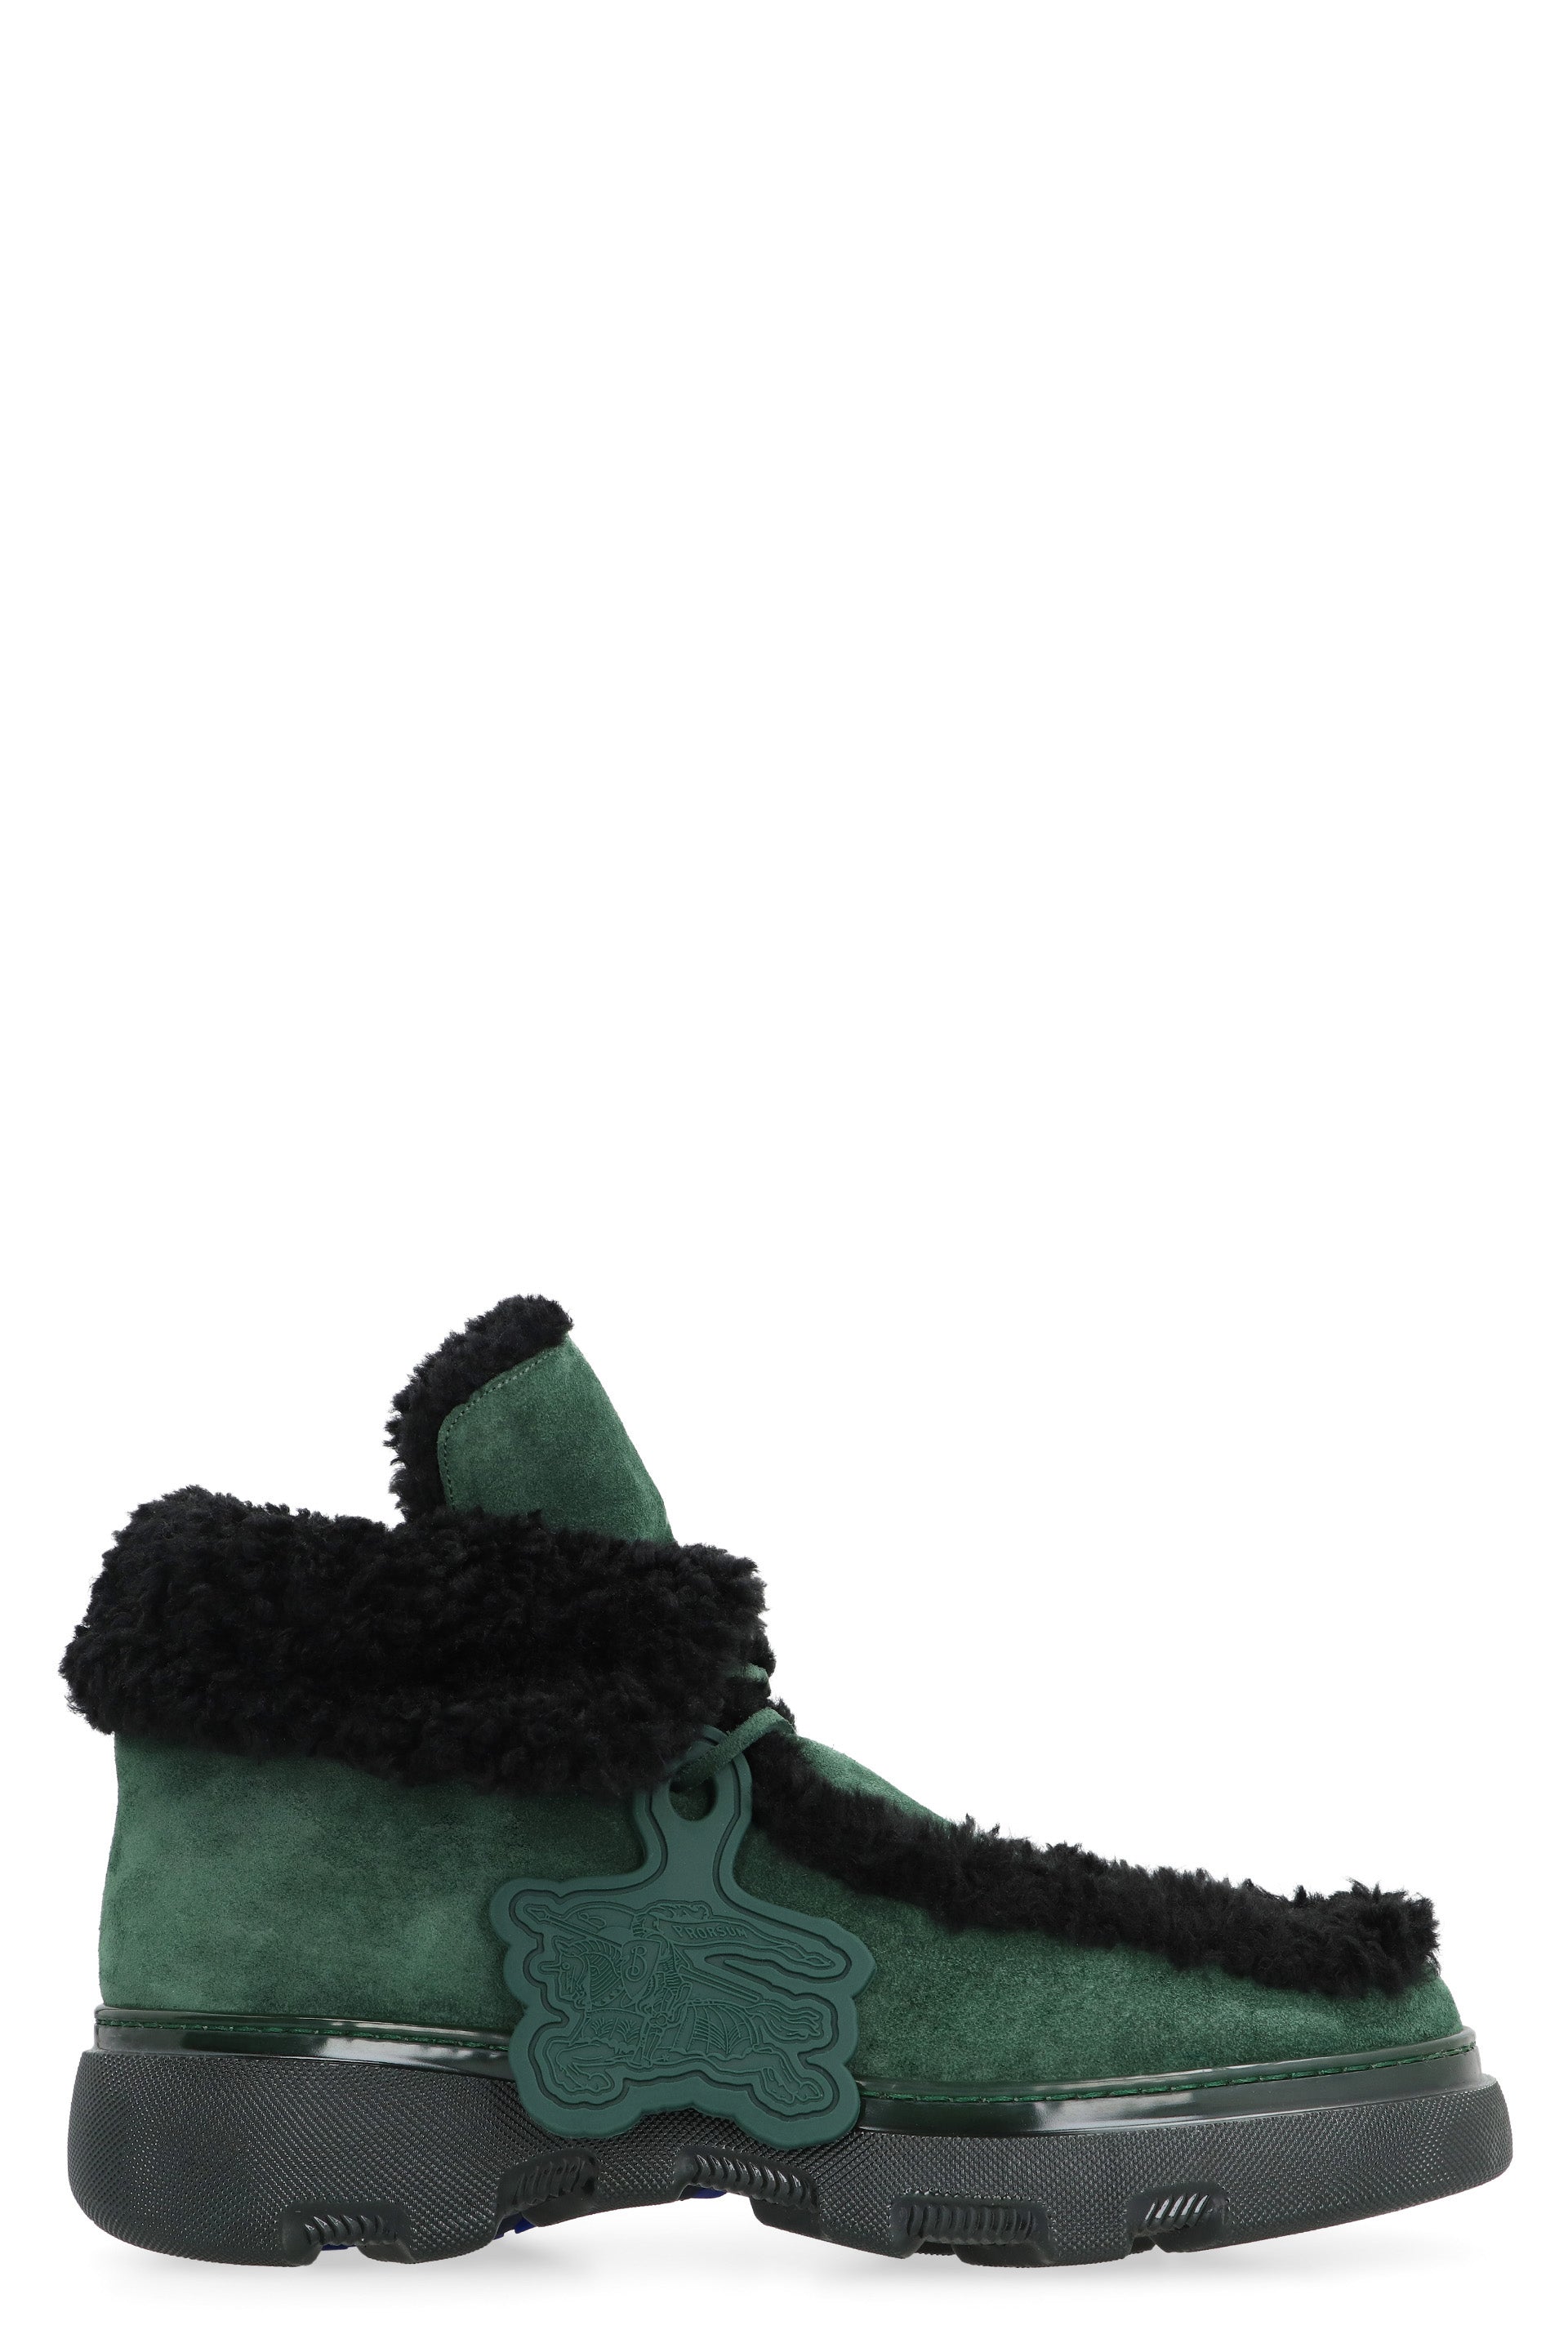 Burberry Green Shearling Ankle Boots For Men